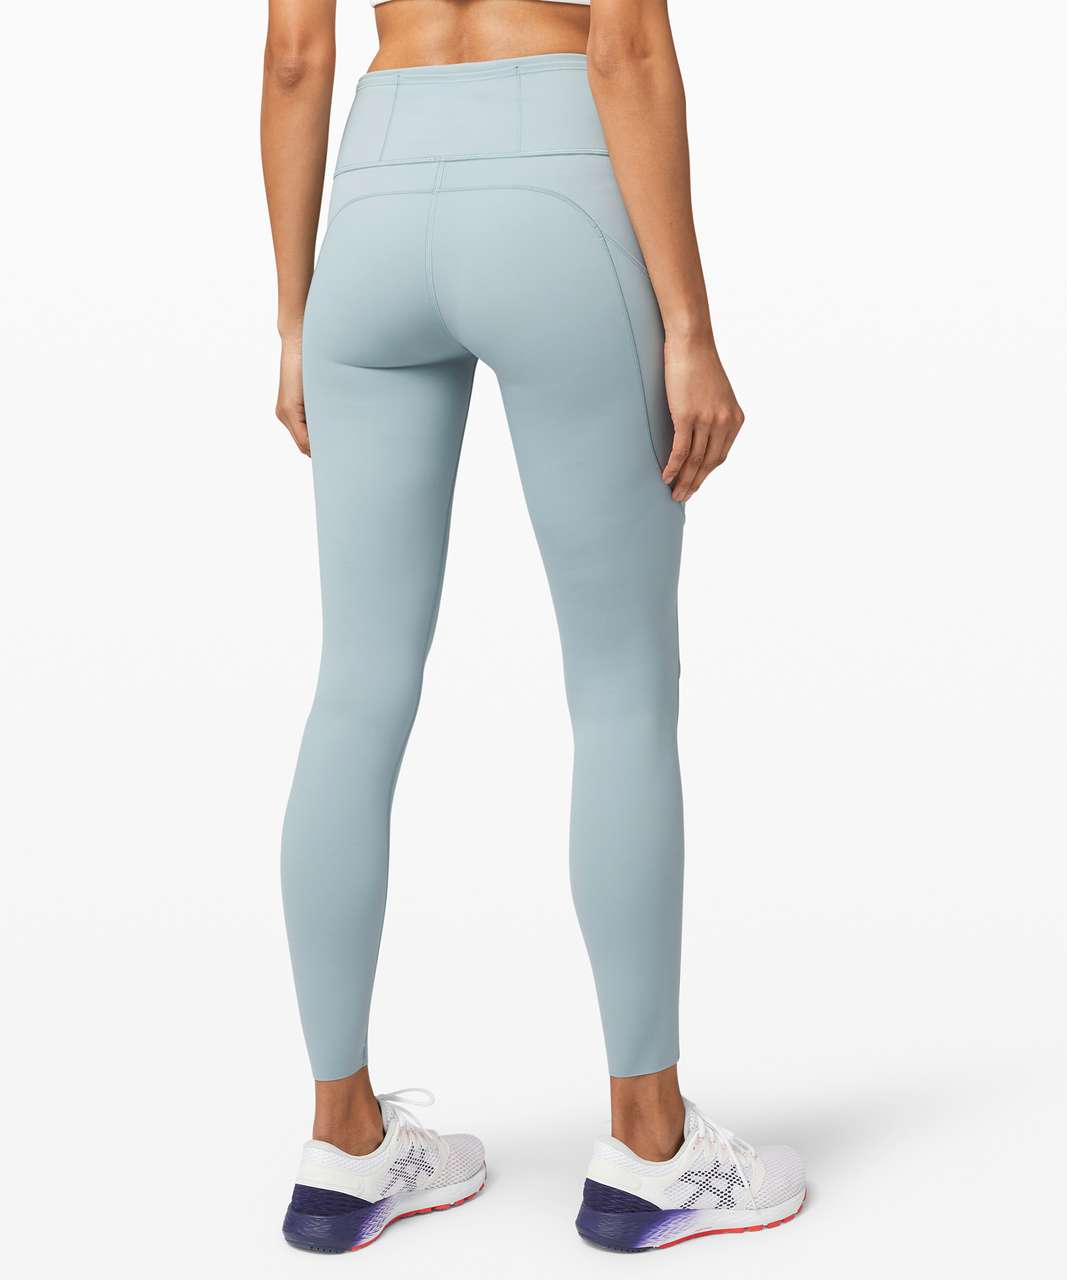 Lululemon Fast and Free Tight 31" *Non-Reflective - Blue Cast